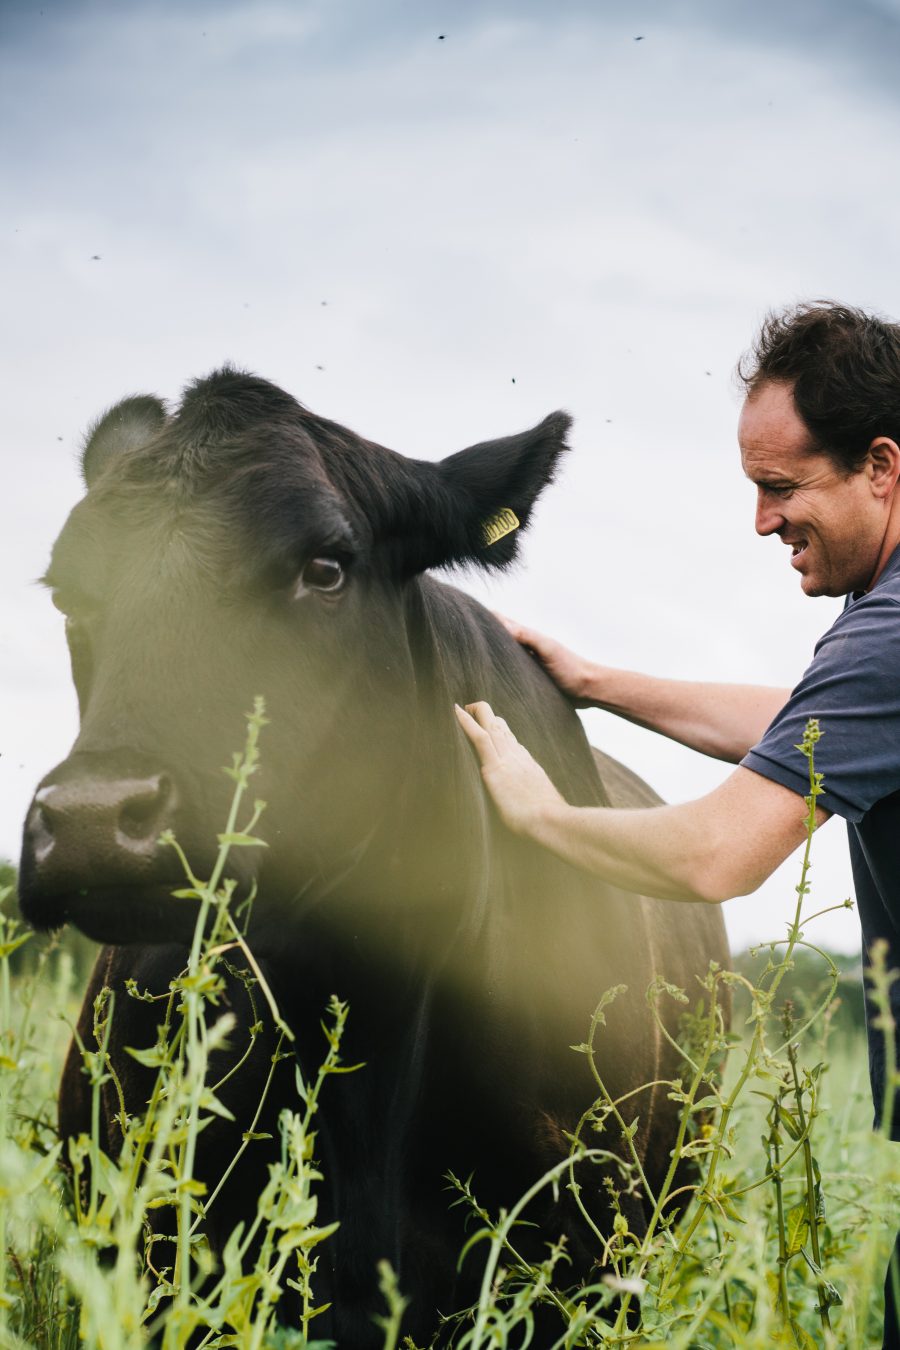 Essex farm wins sustainable beef farm of the year award